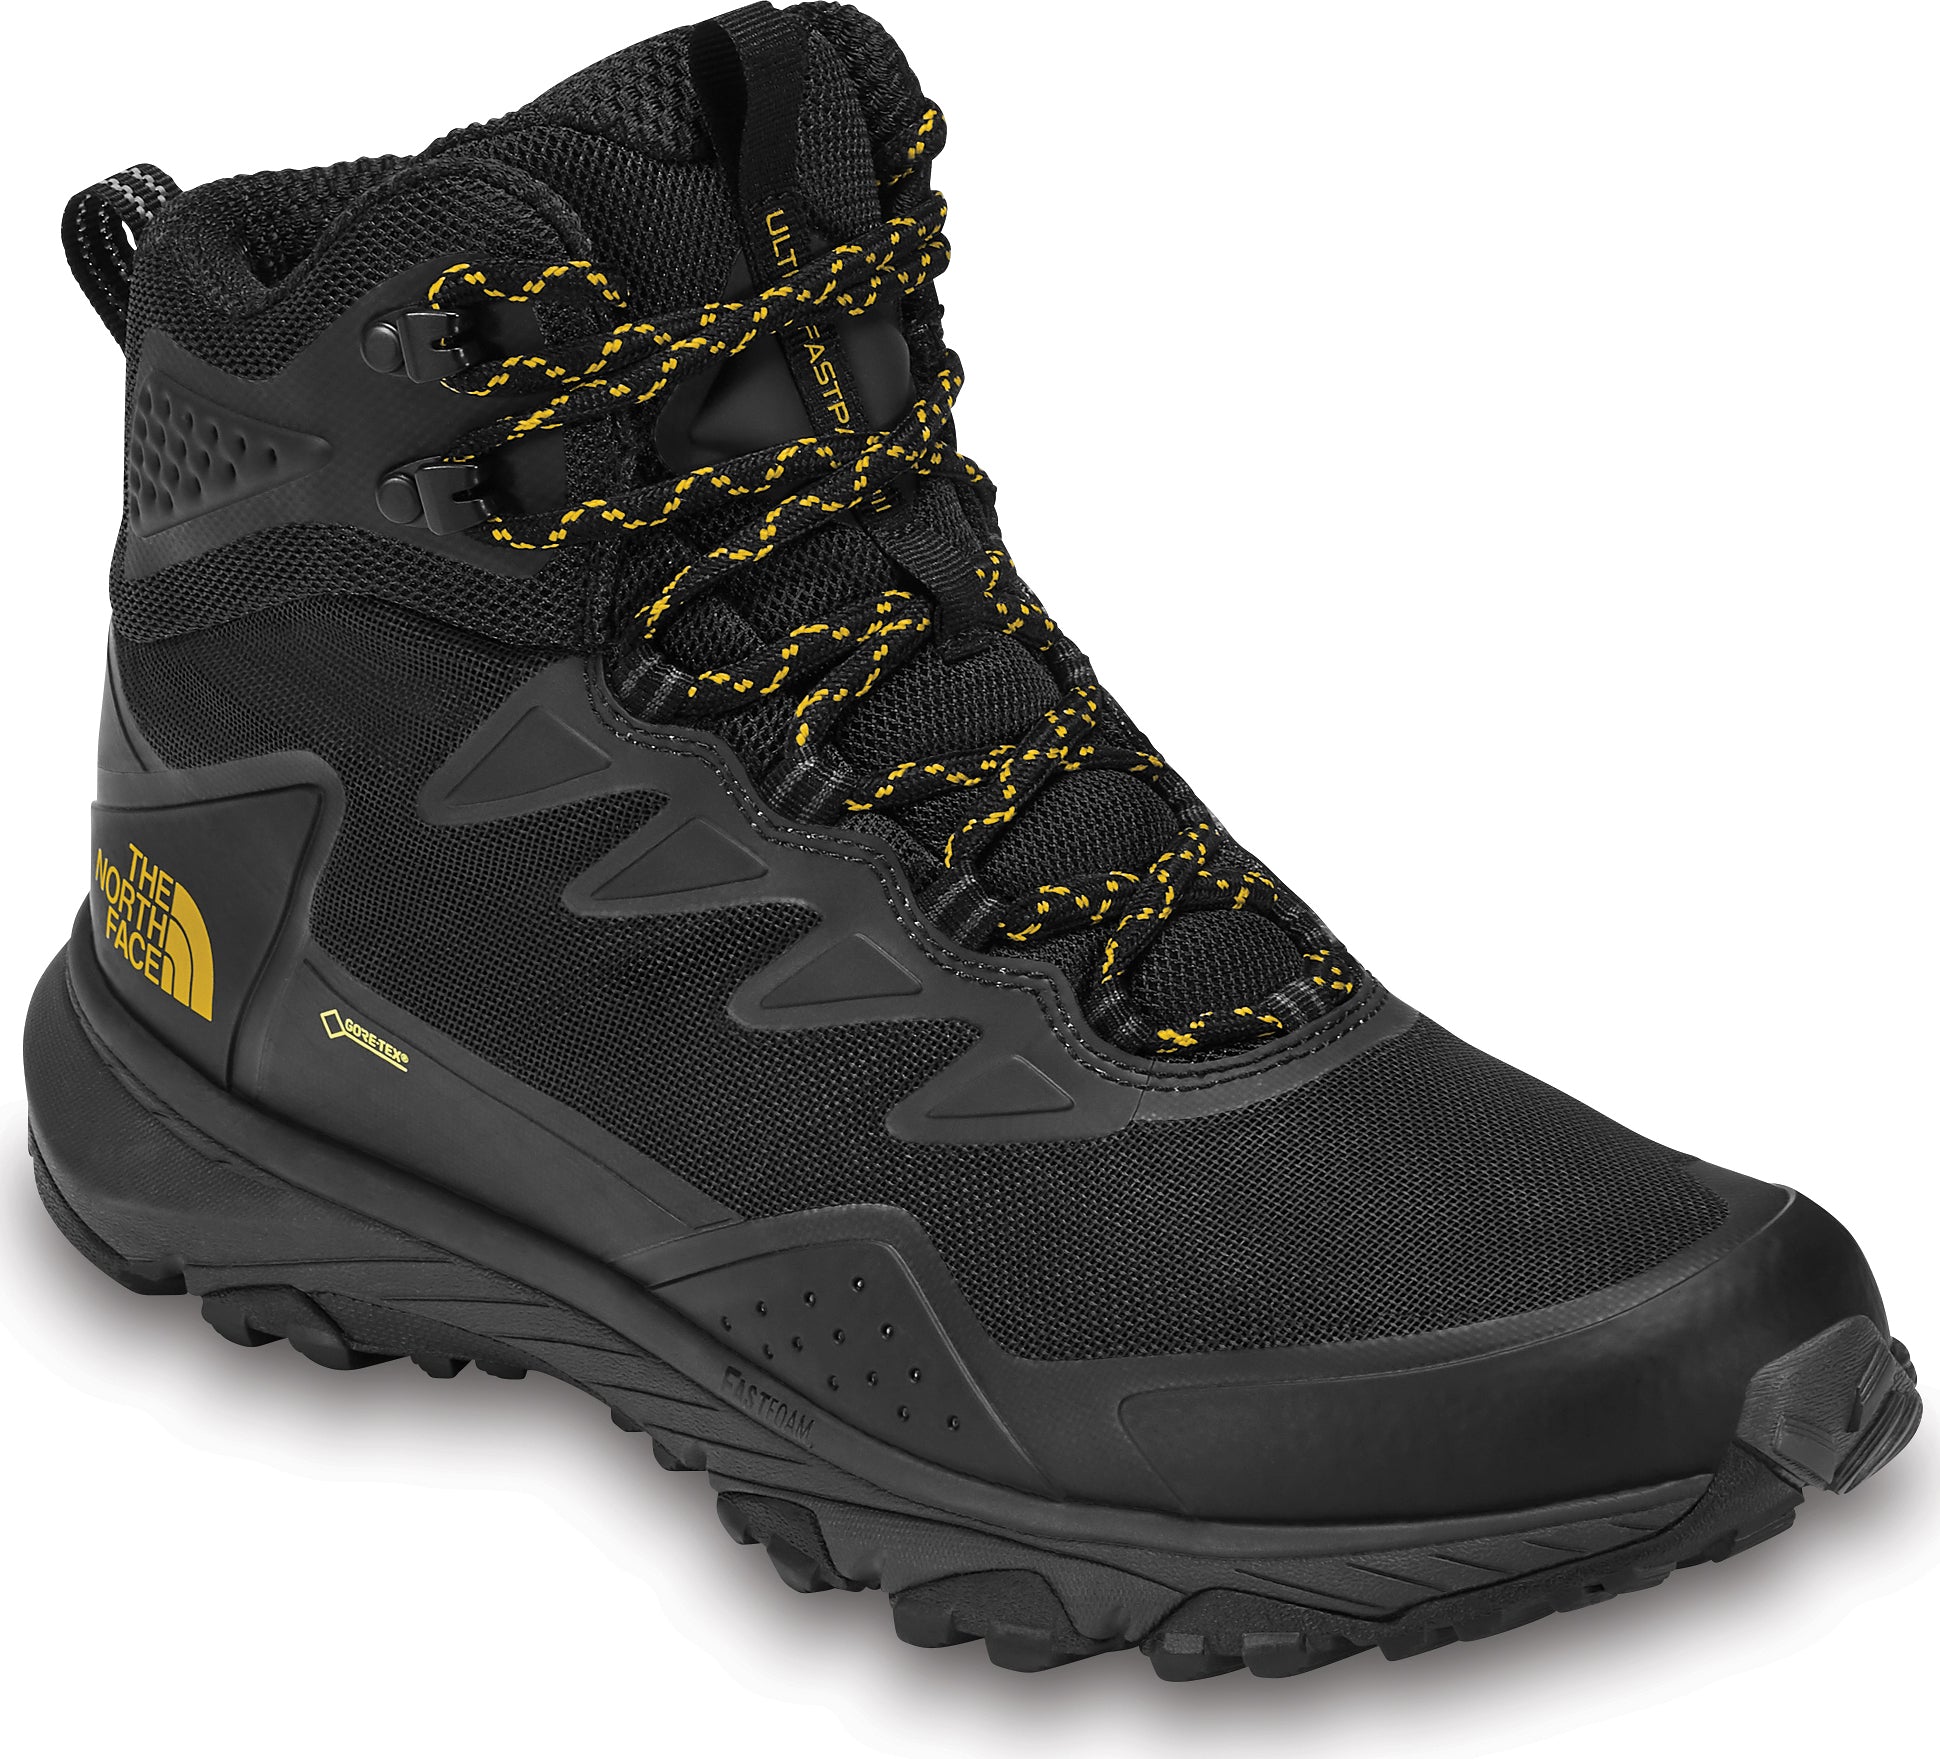 the north face men's ultra fastpack iii mid gtx shoe